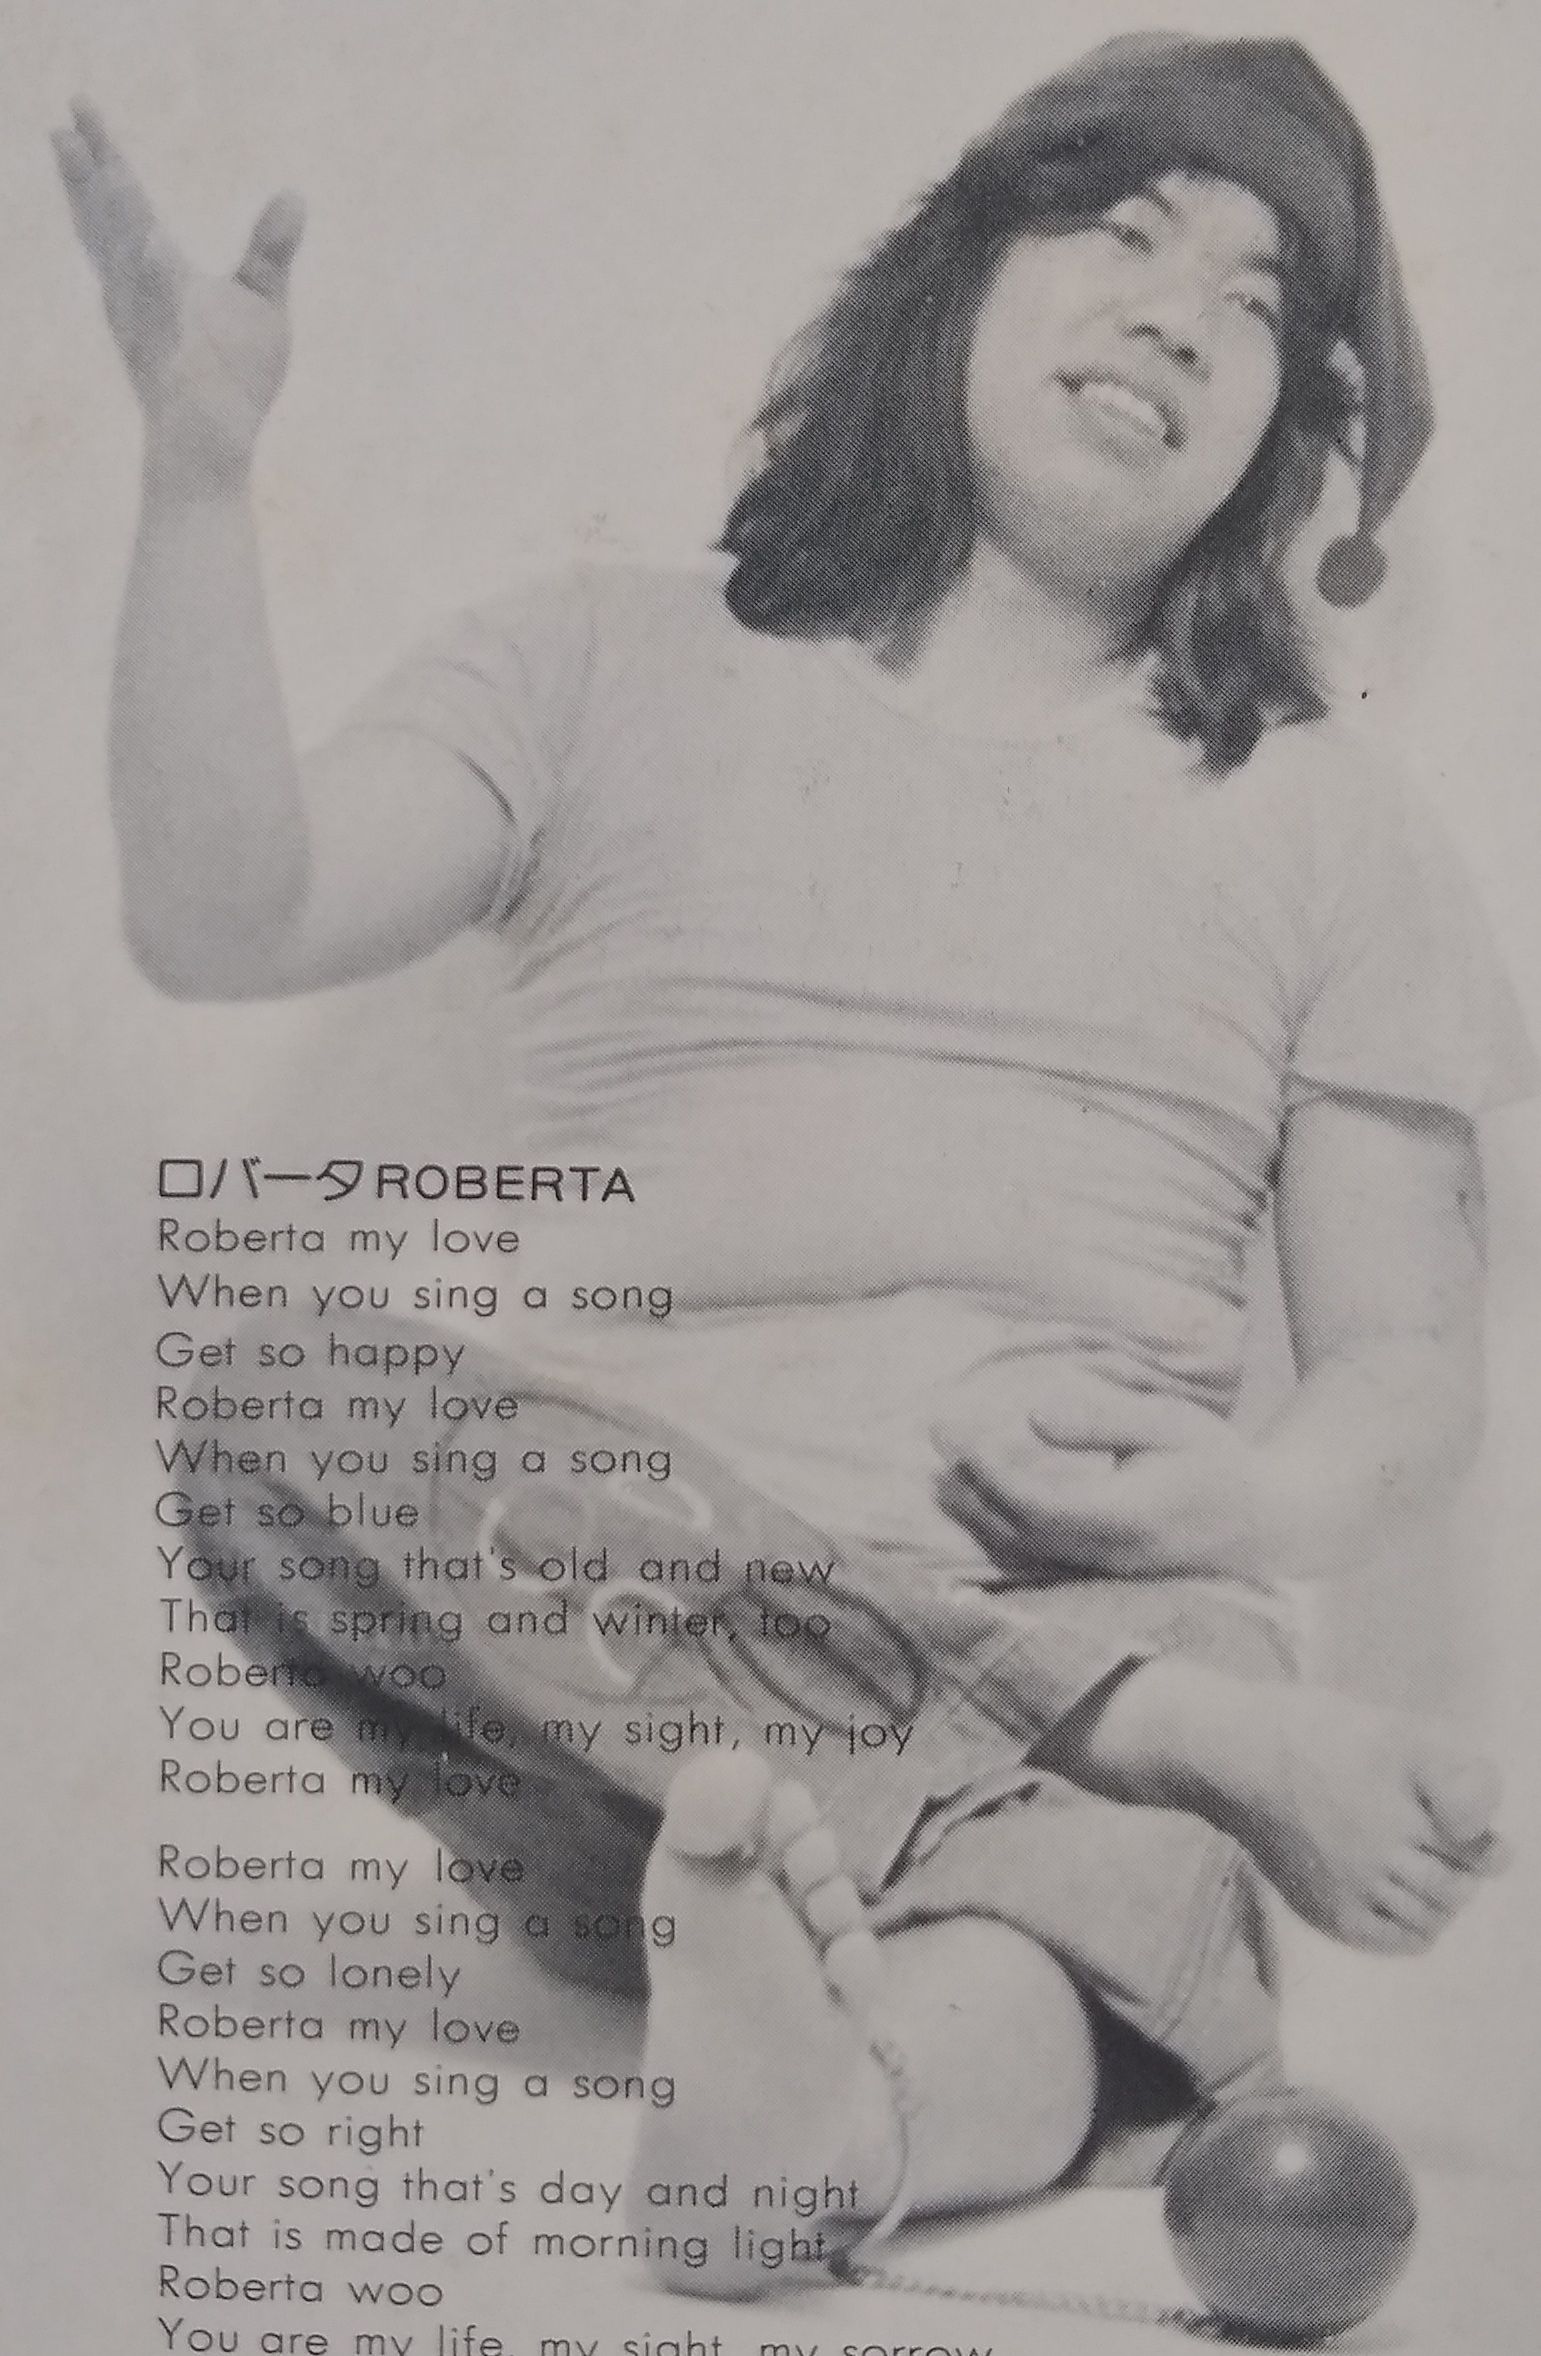 A picture of Hiro Tsunoda from the back cover. He is barefoot and wearing a pointed hat. The lyrics to his song "Roberta" partially cover the image.